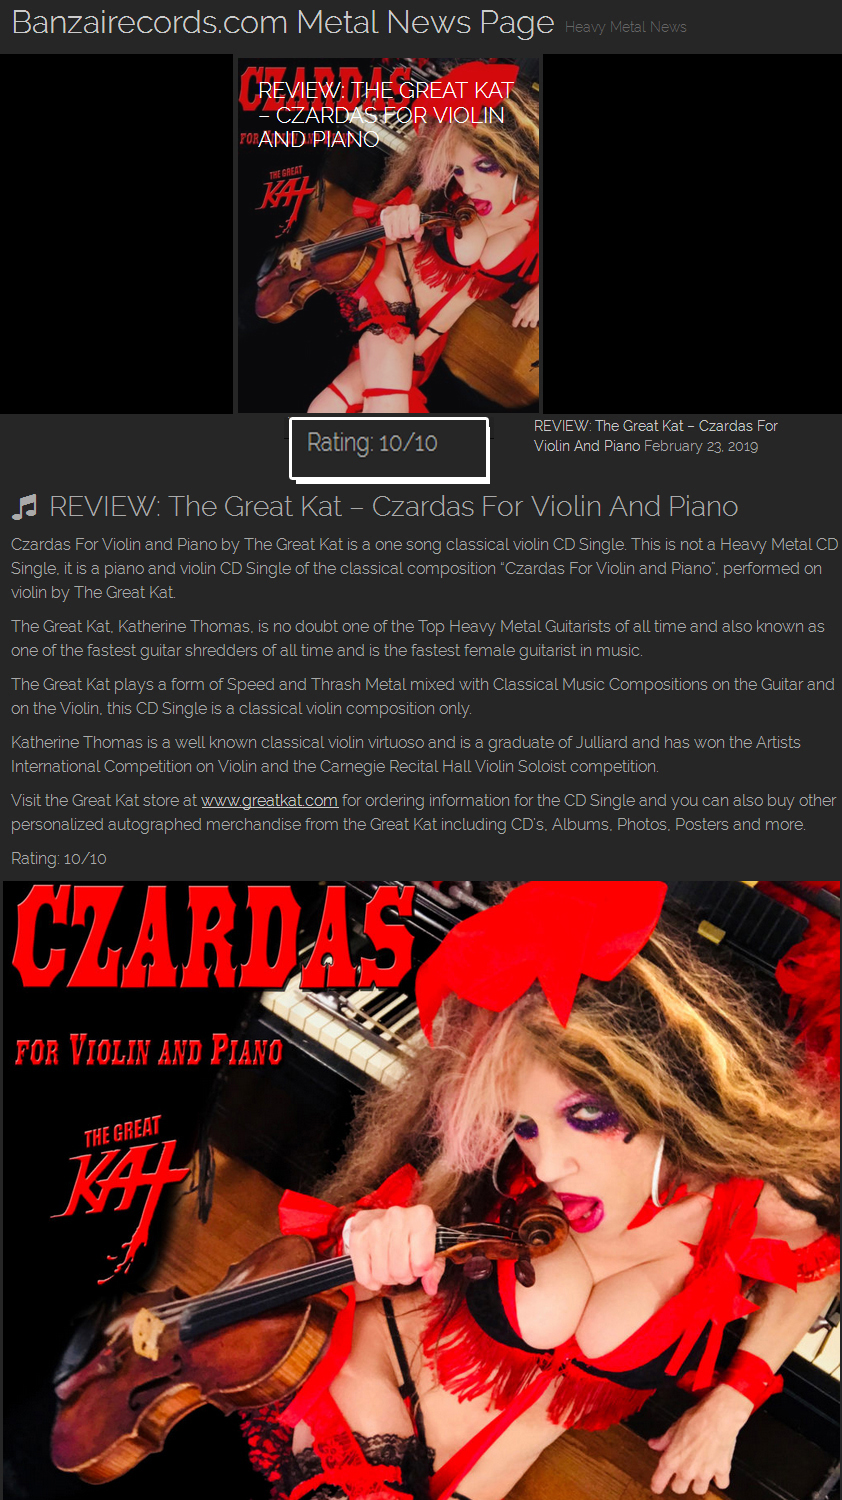 10/10 RATING! REVIEW of The Great Kat's "CZARDAS for VIOLIN AND PIANO" on BANZAIRECORDS.COM METAL NEWS! "Czardas For Violin and Piano by The Great Kat is a one song classical violin CD Single.The Great Kat, is one of the Top Heavy Metal Guitarists of all time, one of the fastest guitar shredders of all time and the fastest female guitarist in music. Katherine Thomas is a well known classical violin virtuoso and is a graduate of Juilliard and has won the Artists International Competition on Violin and the Carnegie Recital Hall Violin Soloist competition. Rating: 10/10" -Jason MacKenzie, BanzaiRecords.com! Read at https://banzairecords.com/blog/2019/02/23/review-the-great-kat-czardas-for-violin-and-piano 